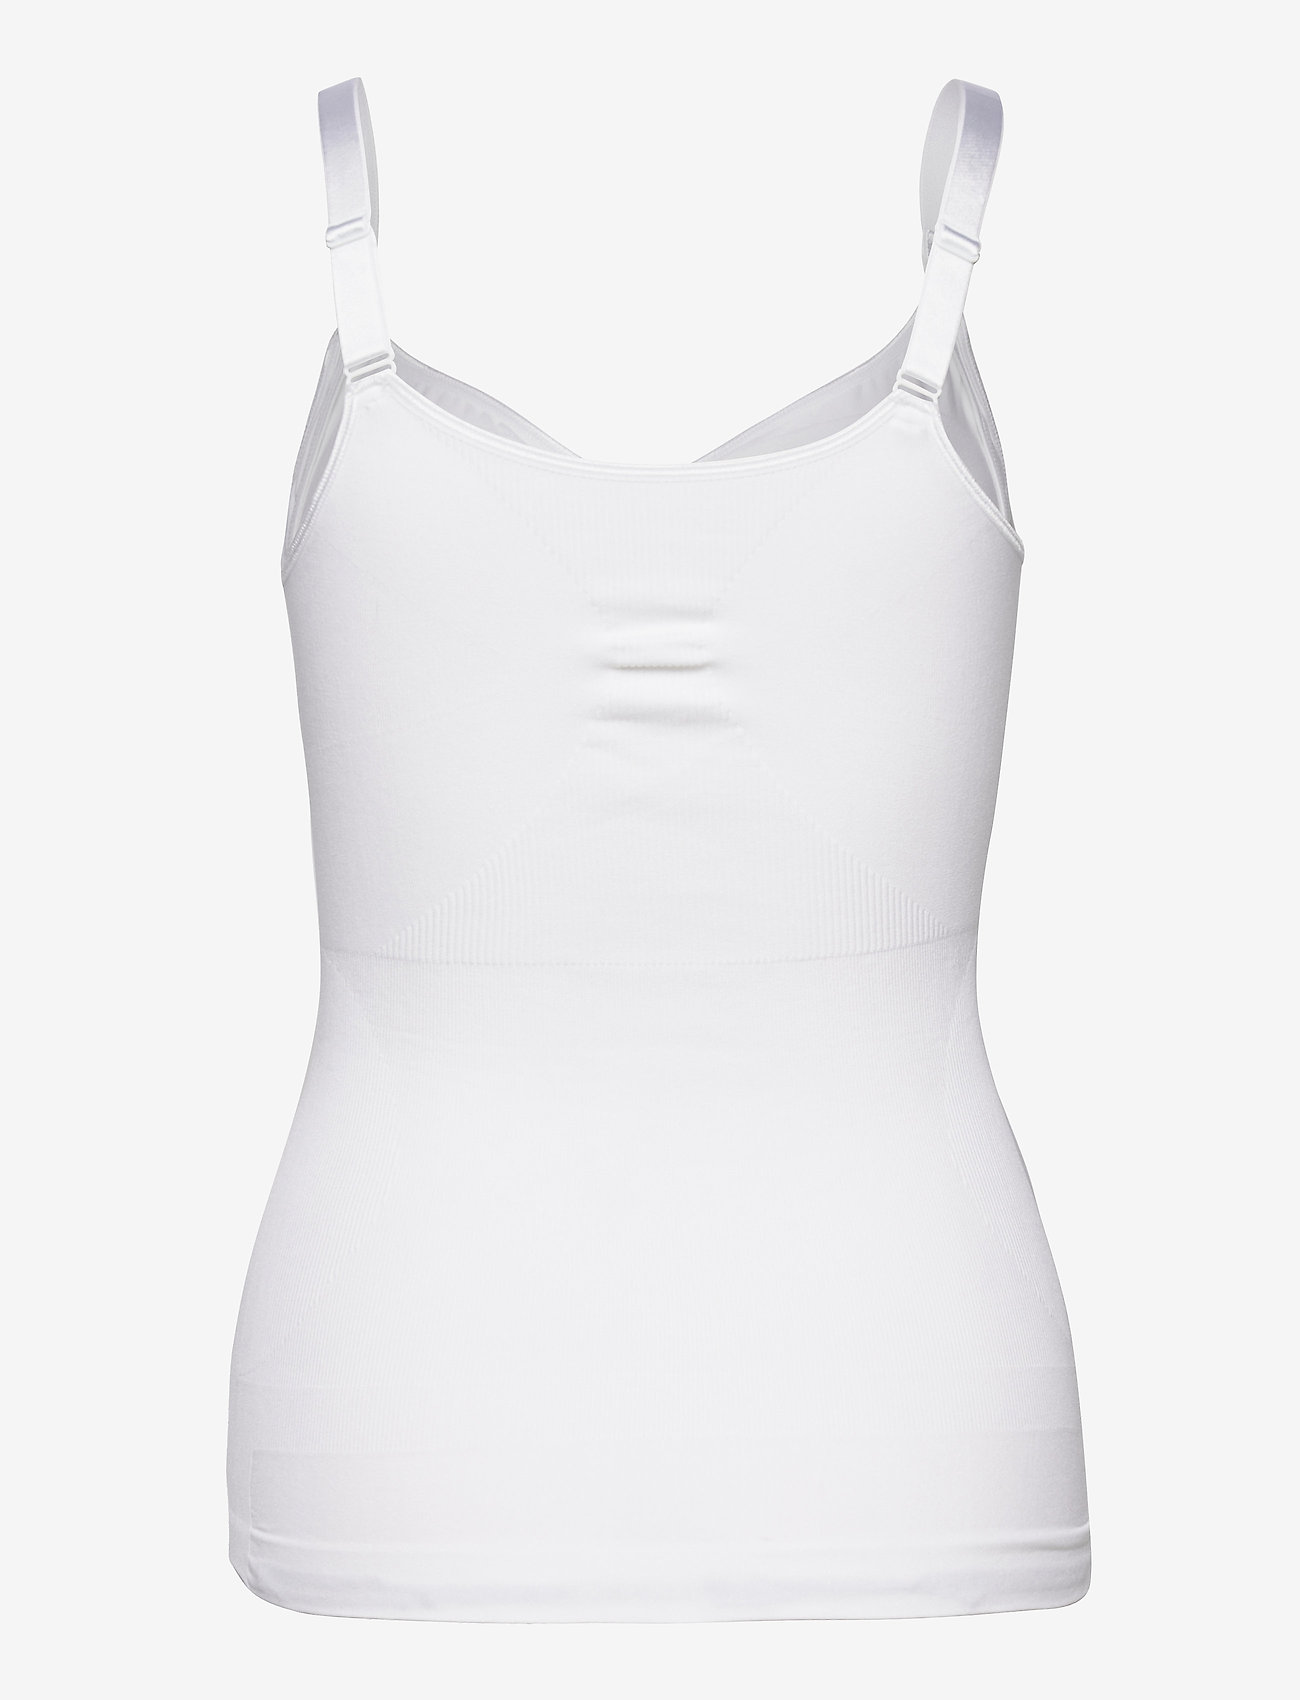 Carriwell - Nursing Top with Shapewear - umstandsmode - white - 1